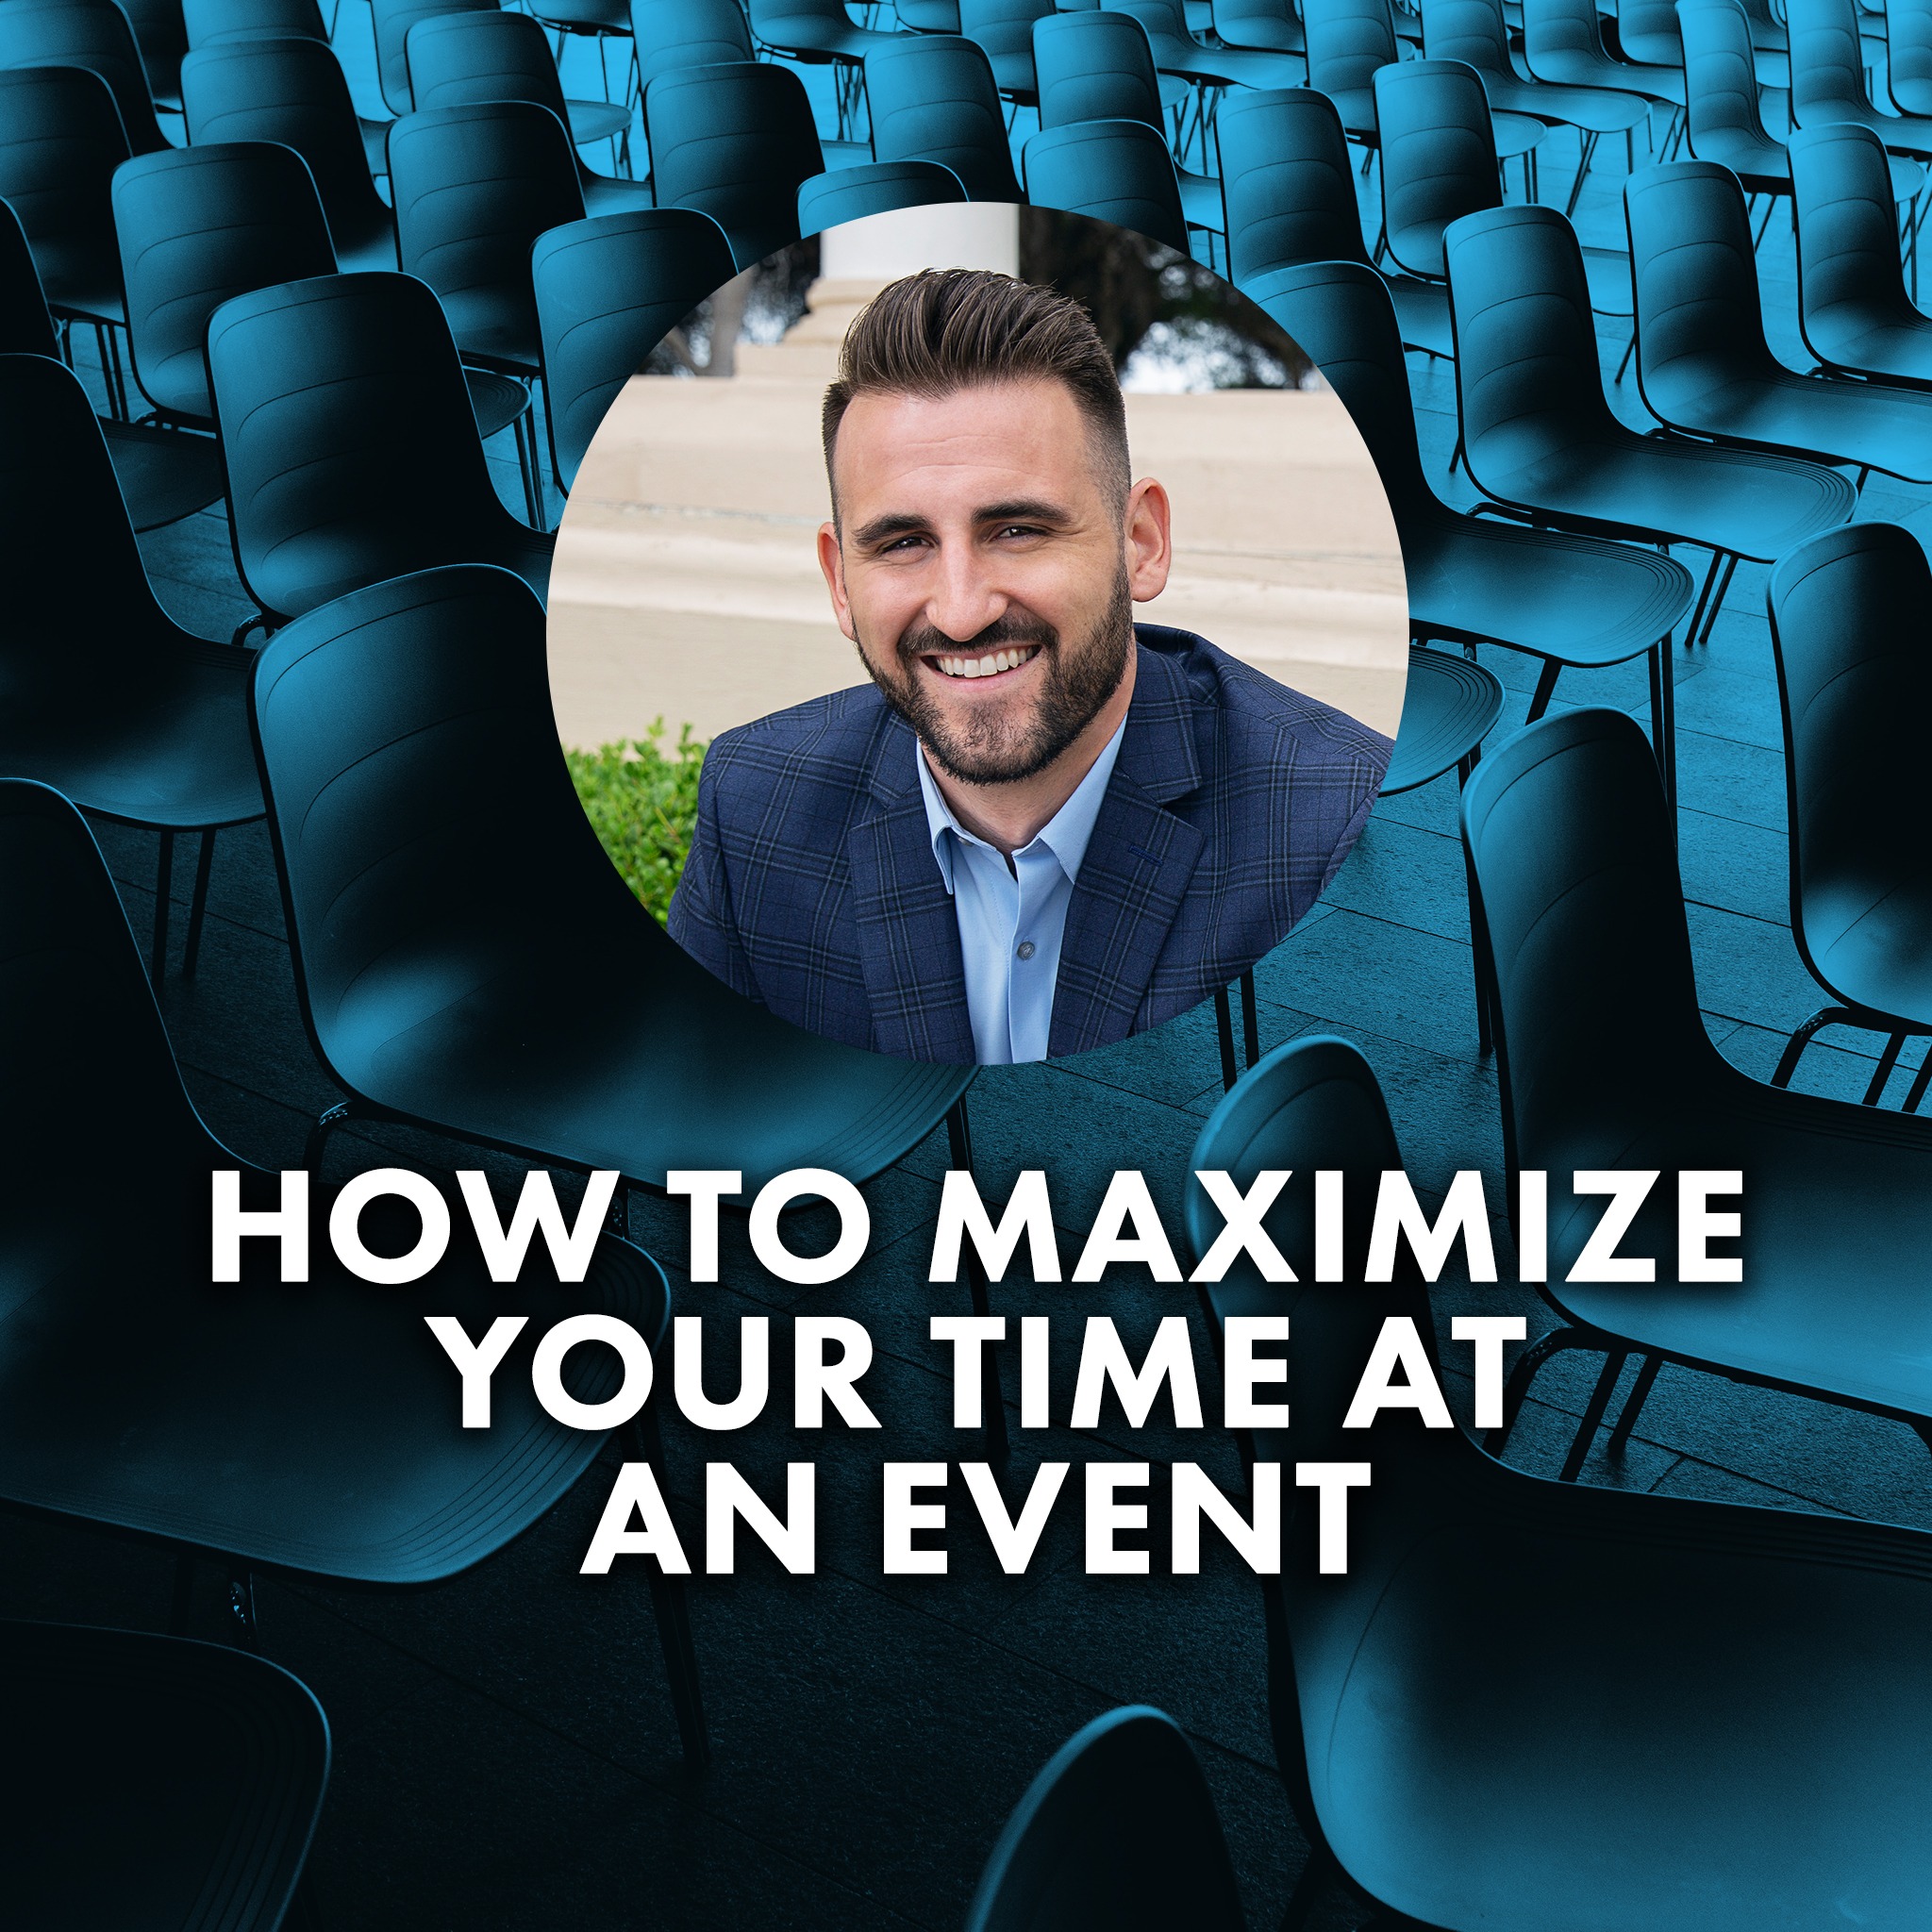 How to Maximize Your Time at An Event